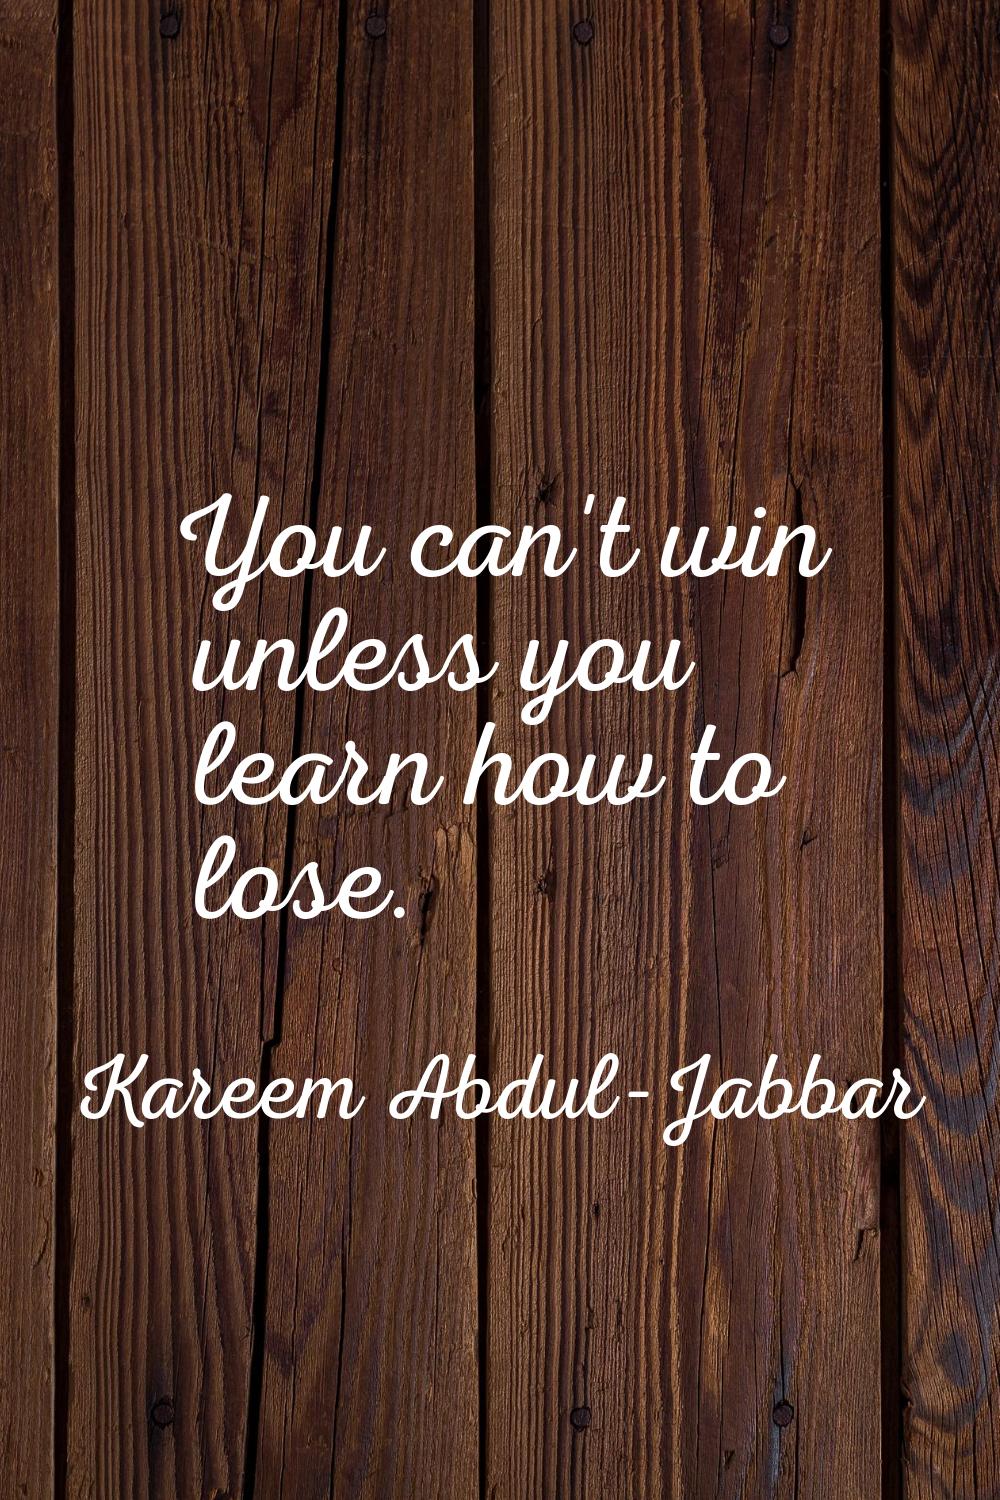 You can't win unless you learn how to lose.